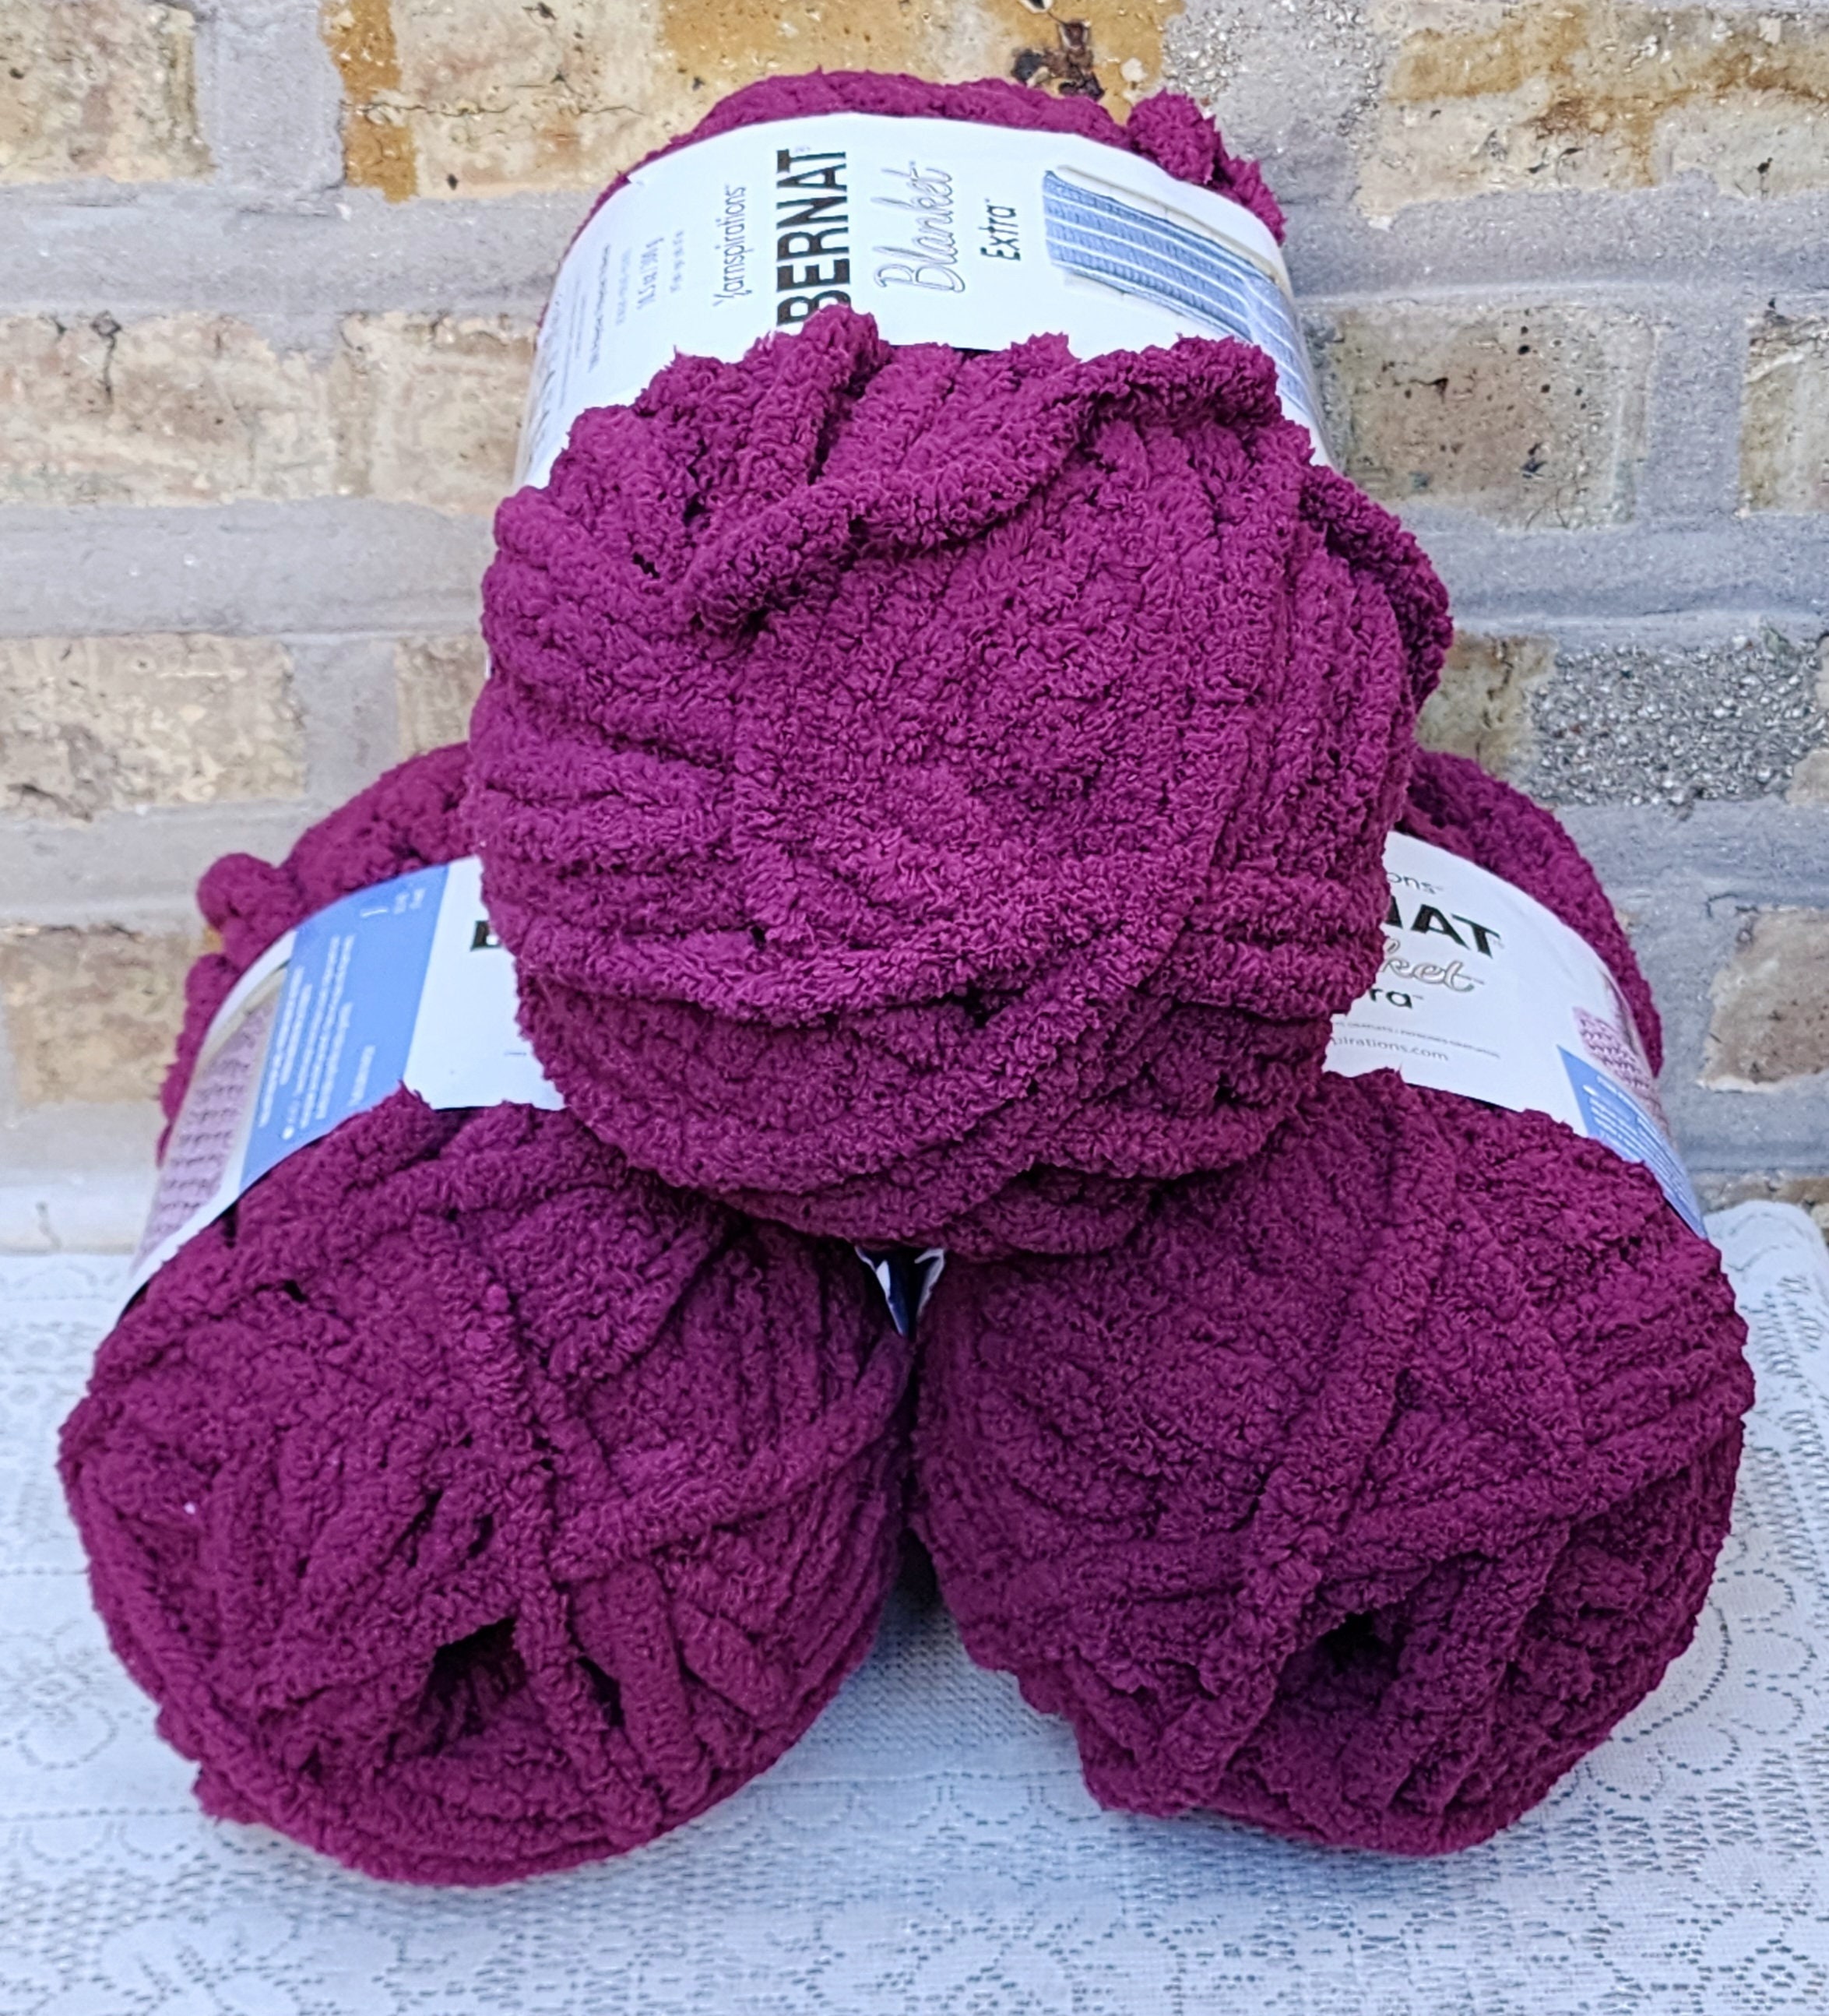 Mainstays 4 pack Chenille Chunky Yarn Heritage Russet Burgundy